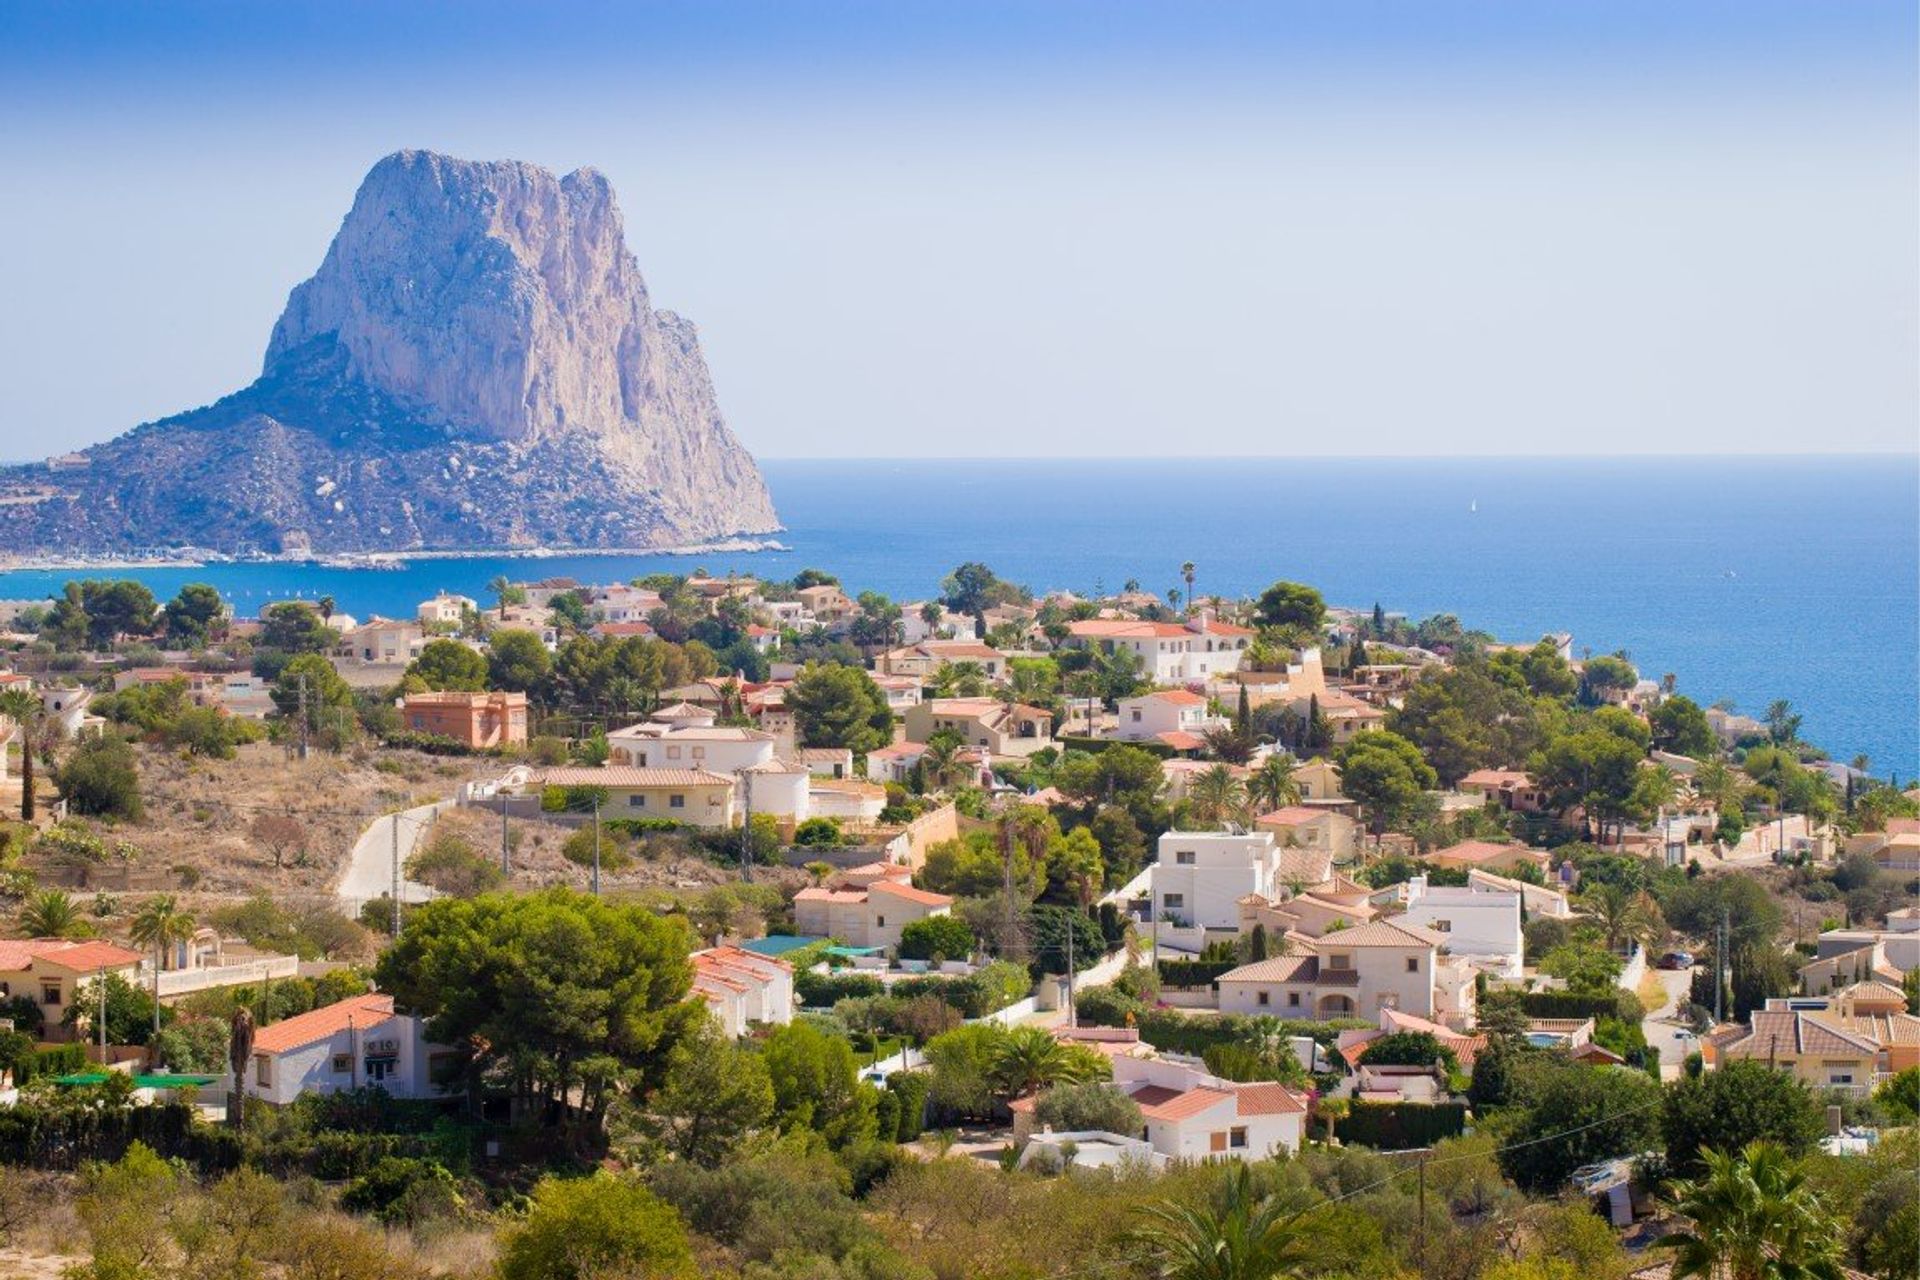 Calpe is home to over 13,000 inhabitants and is one of the most popular holiday destinations in the Costa Blanca